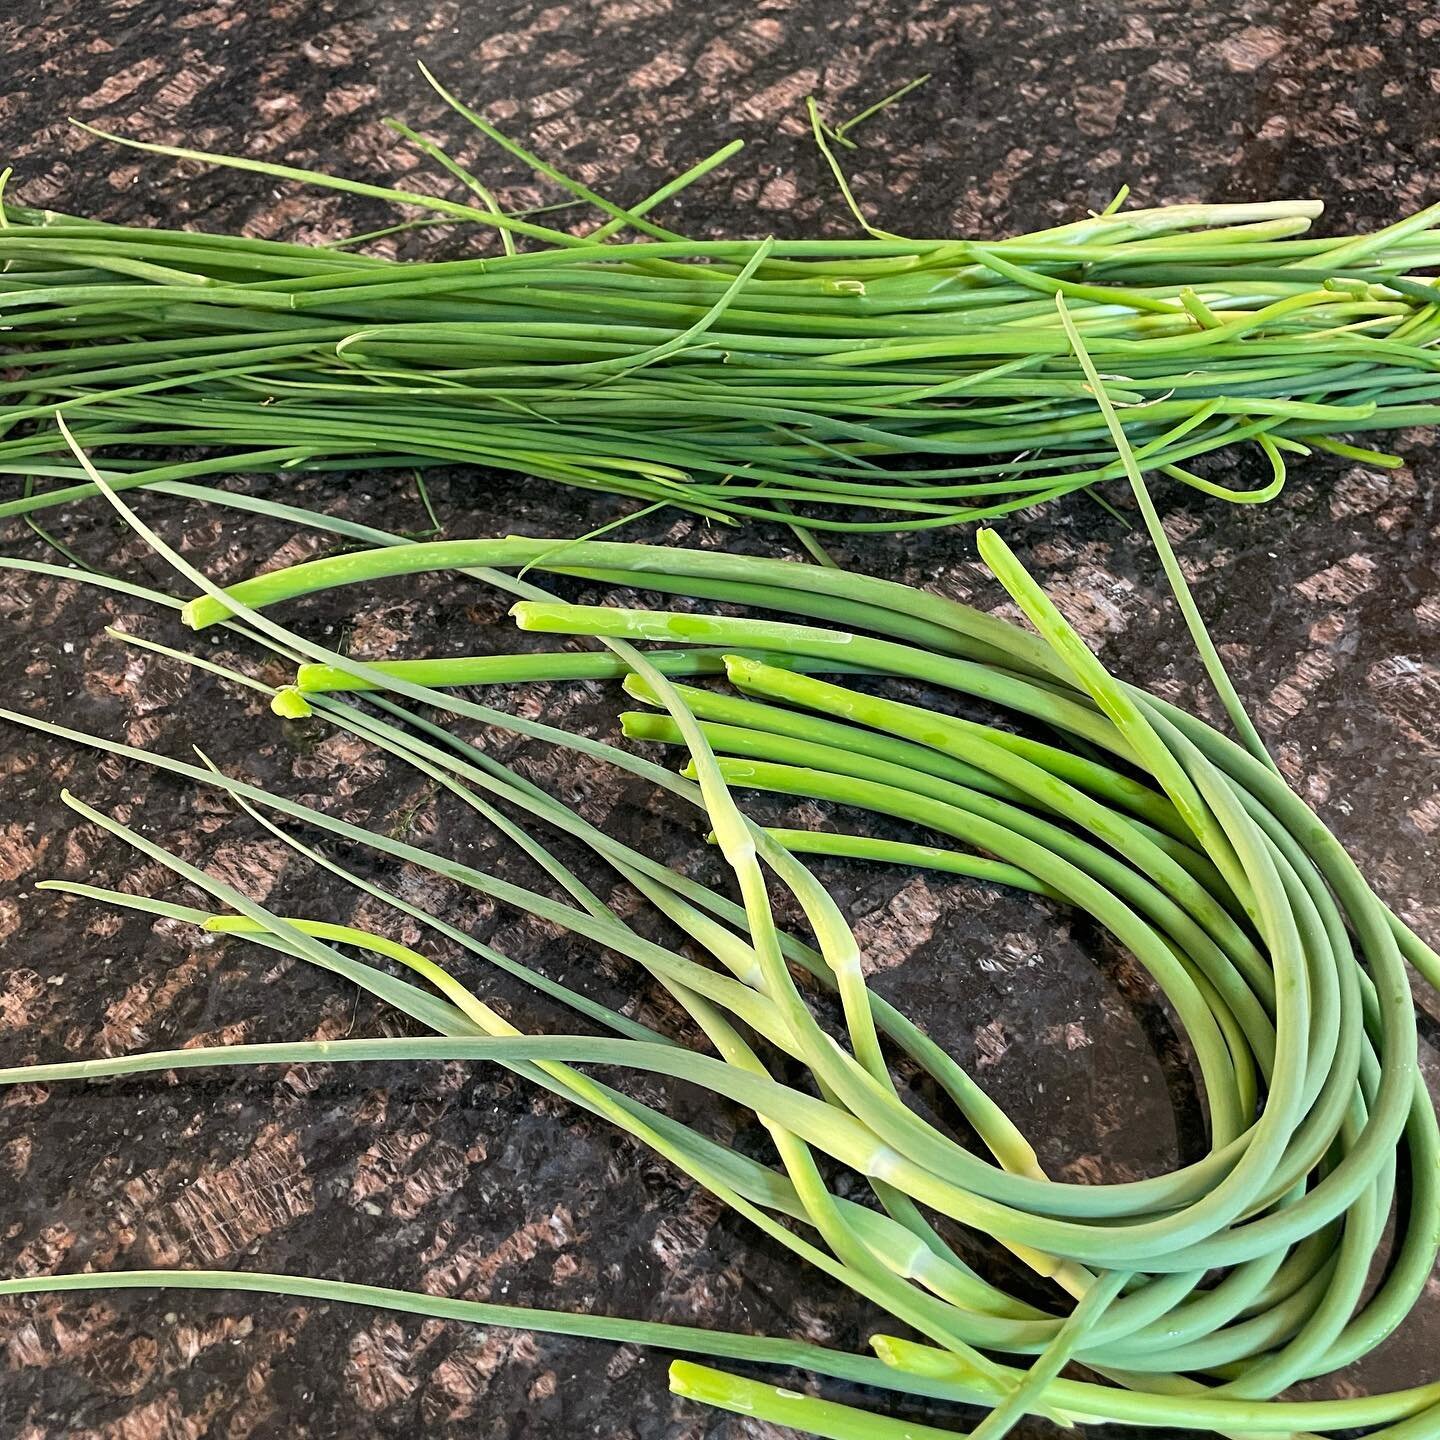 Fresh Chives and Scapes from the garden - Excited to cook with them!! #backyardgarden #urbangarden #scapes #chives